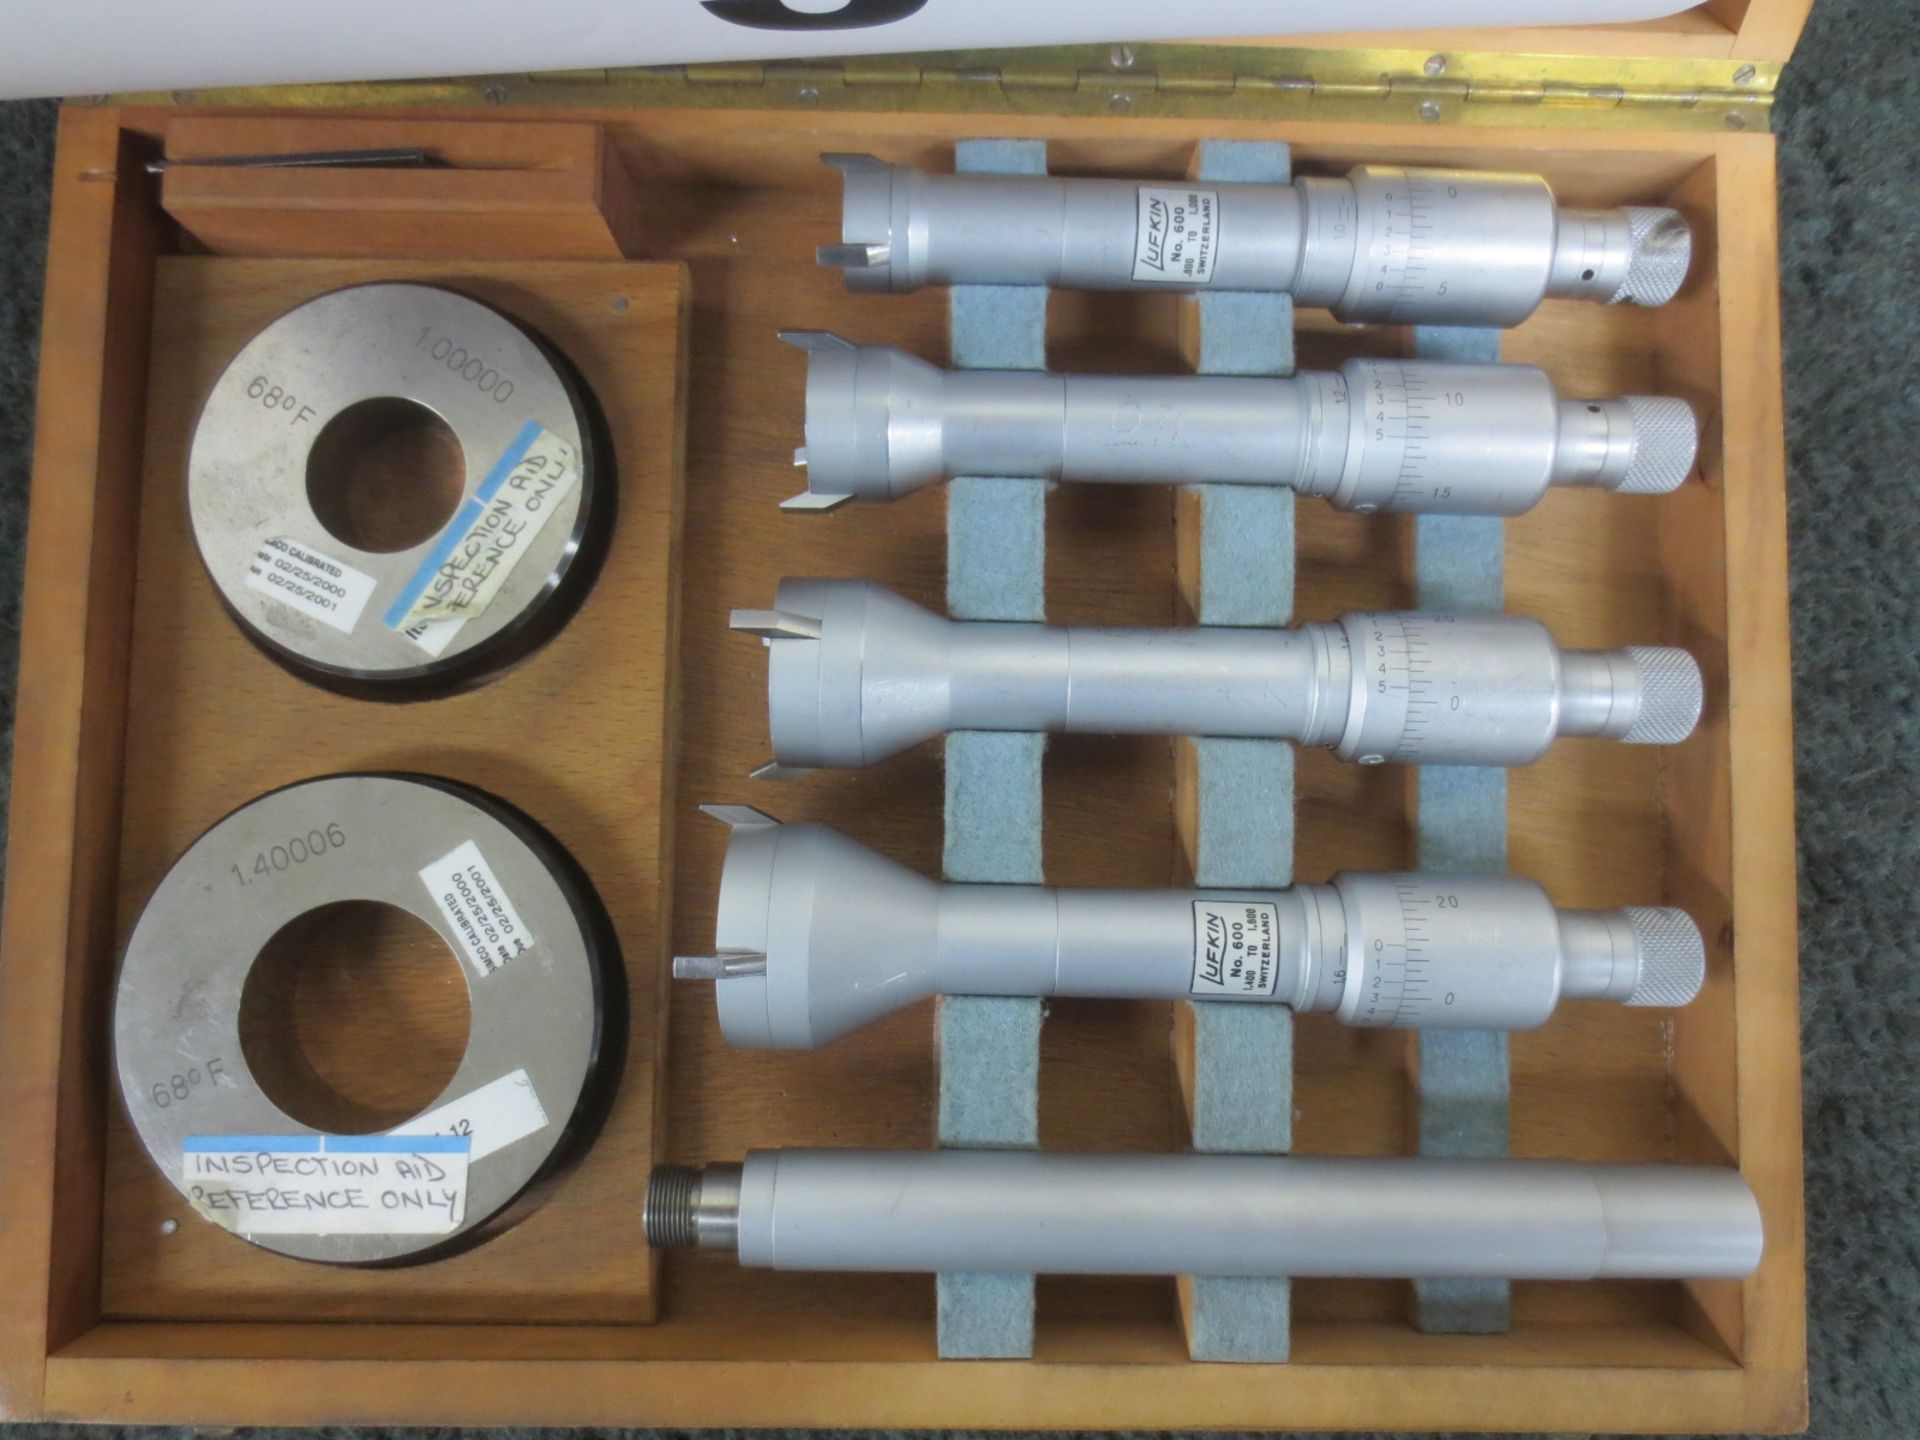 Switzerland Lufkin 3-Point Intrimik Micrometers, No.600, .800 - 1.600, With Case - Image 2 of 2